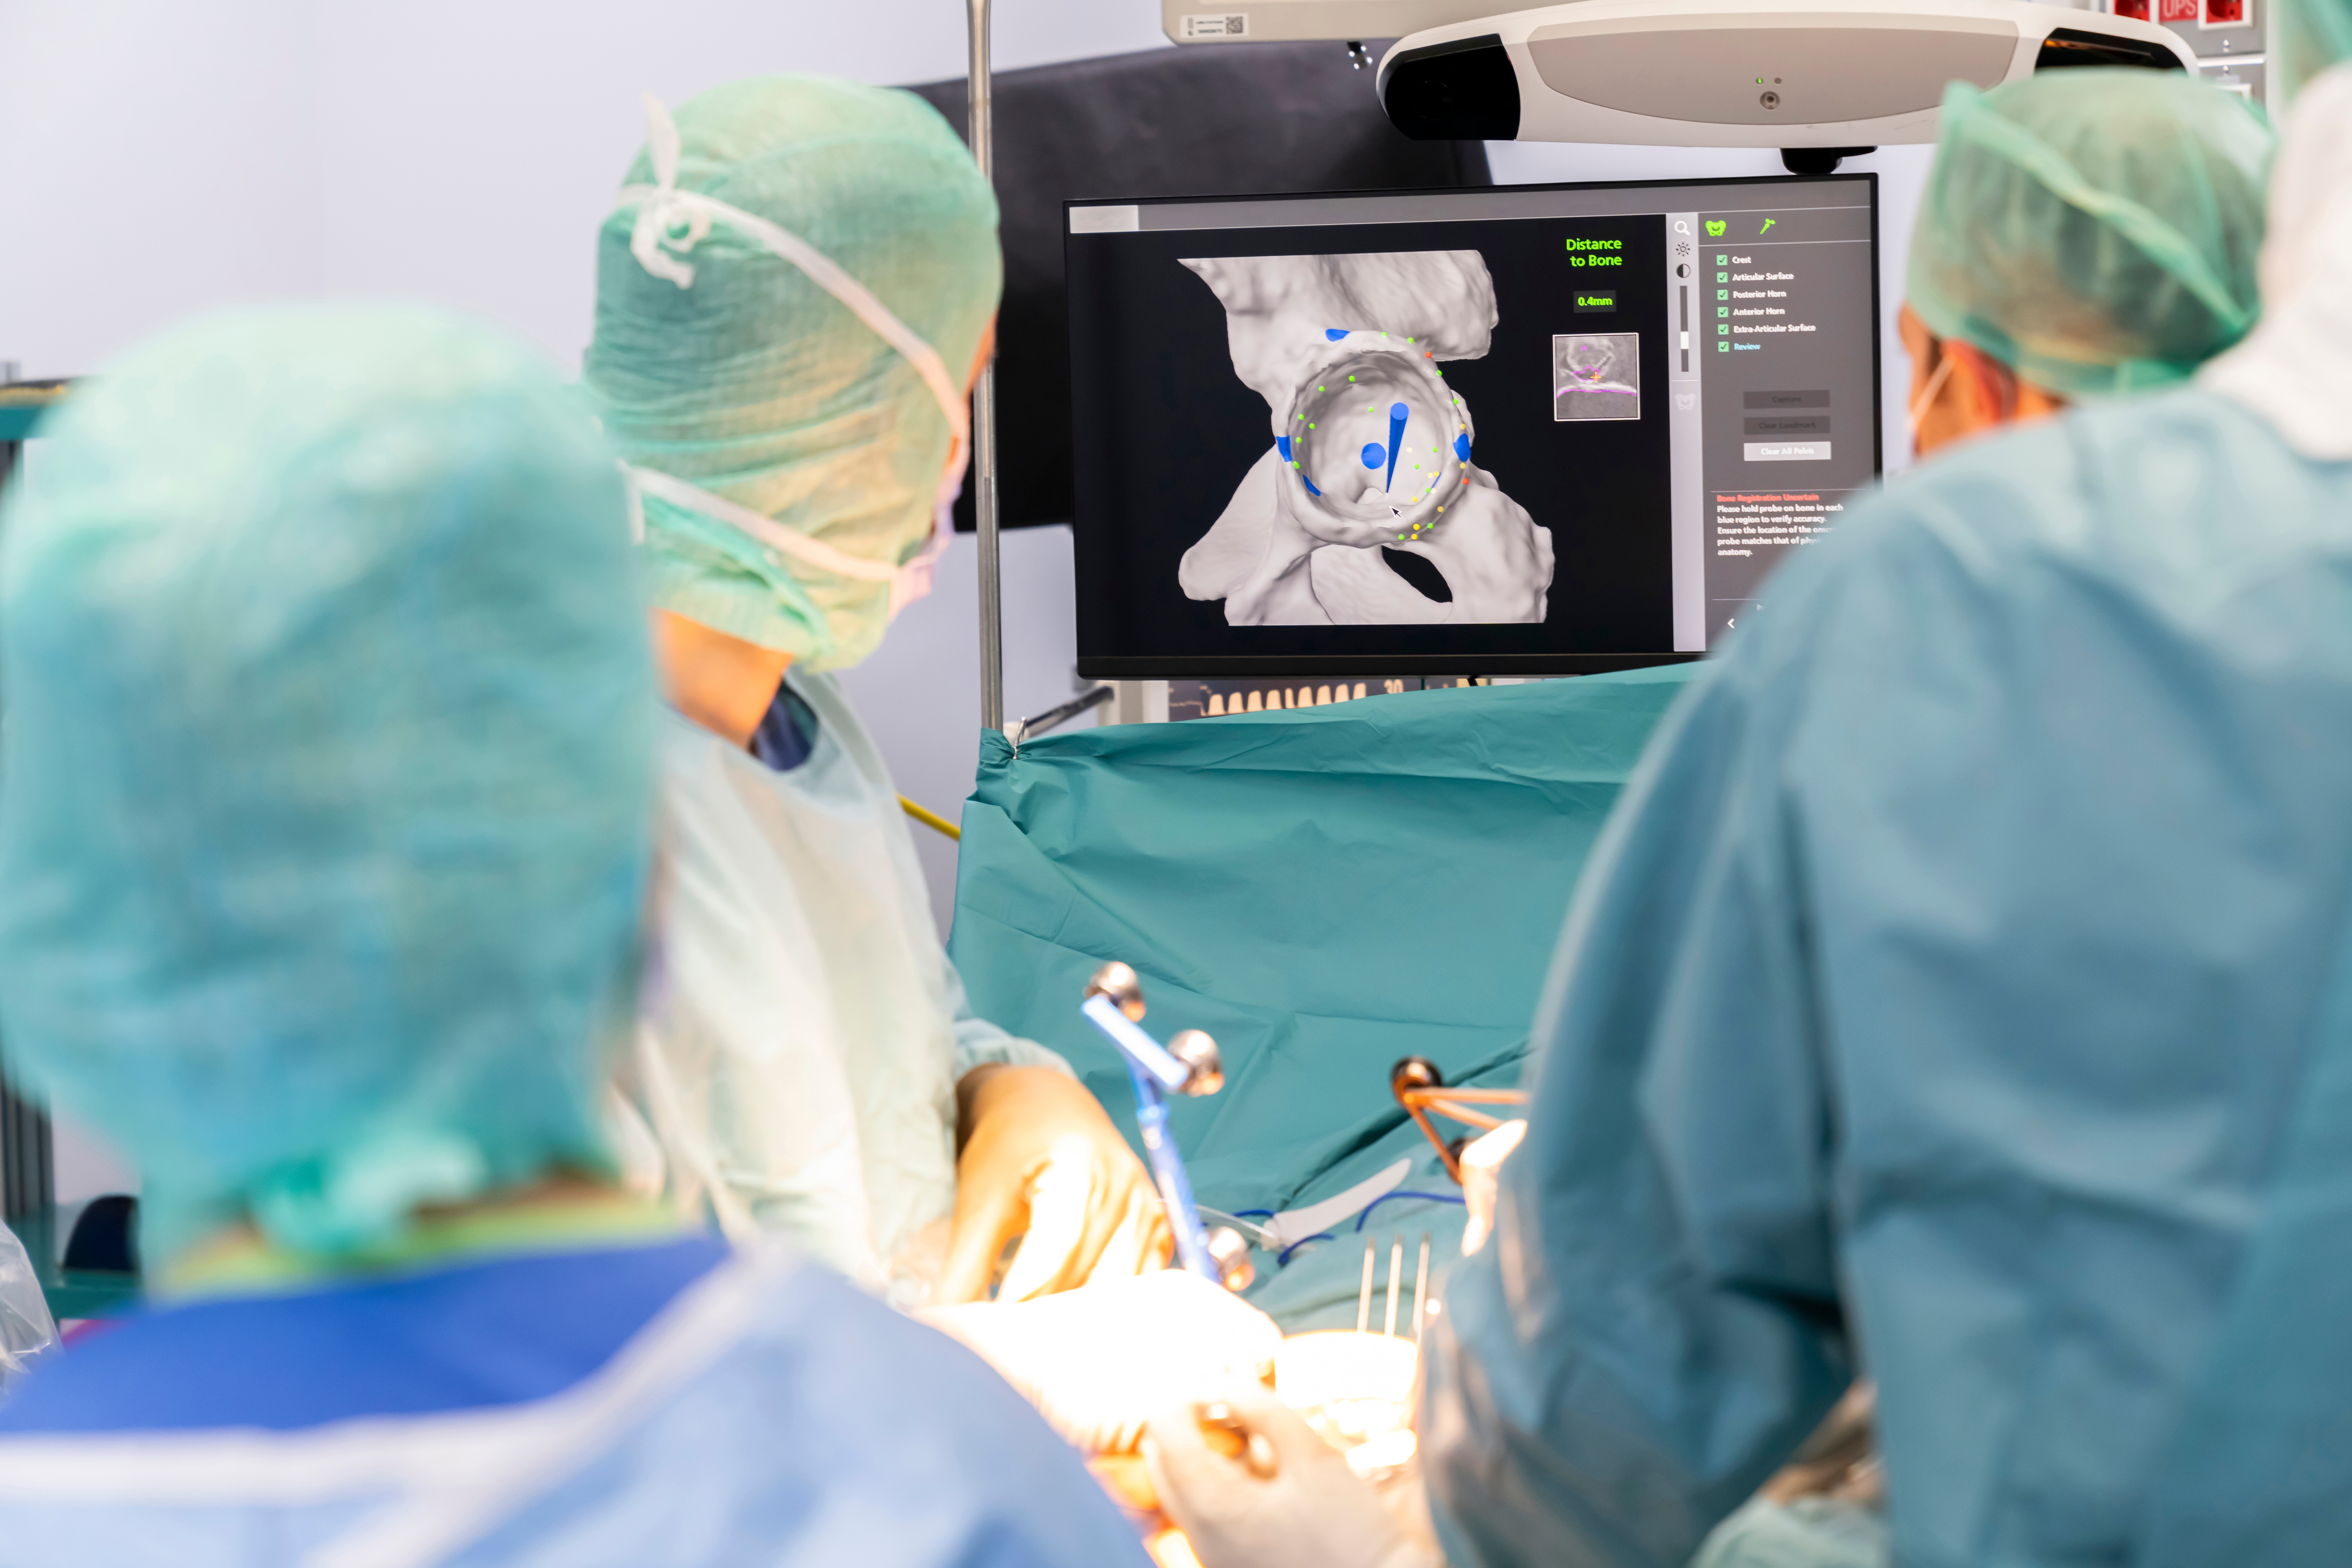 Reimbursement of robotic surgery expected to increase in Asia